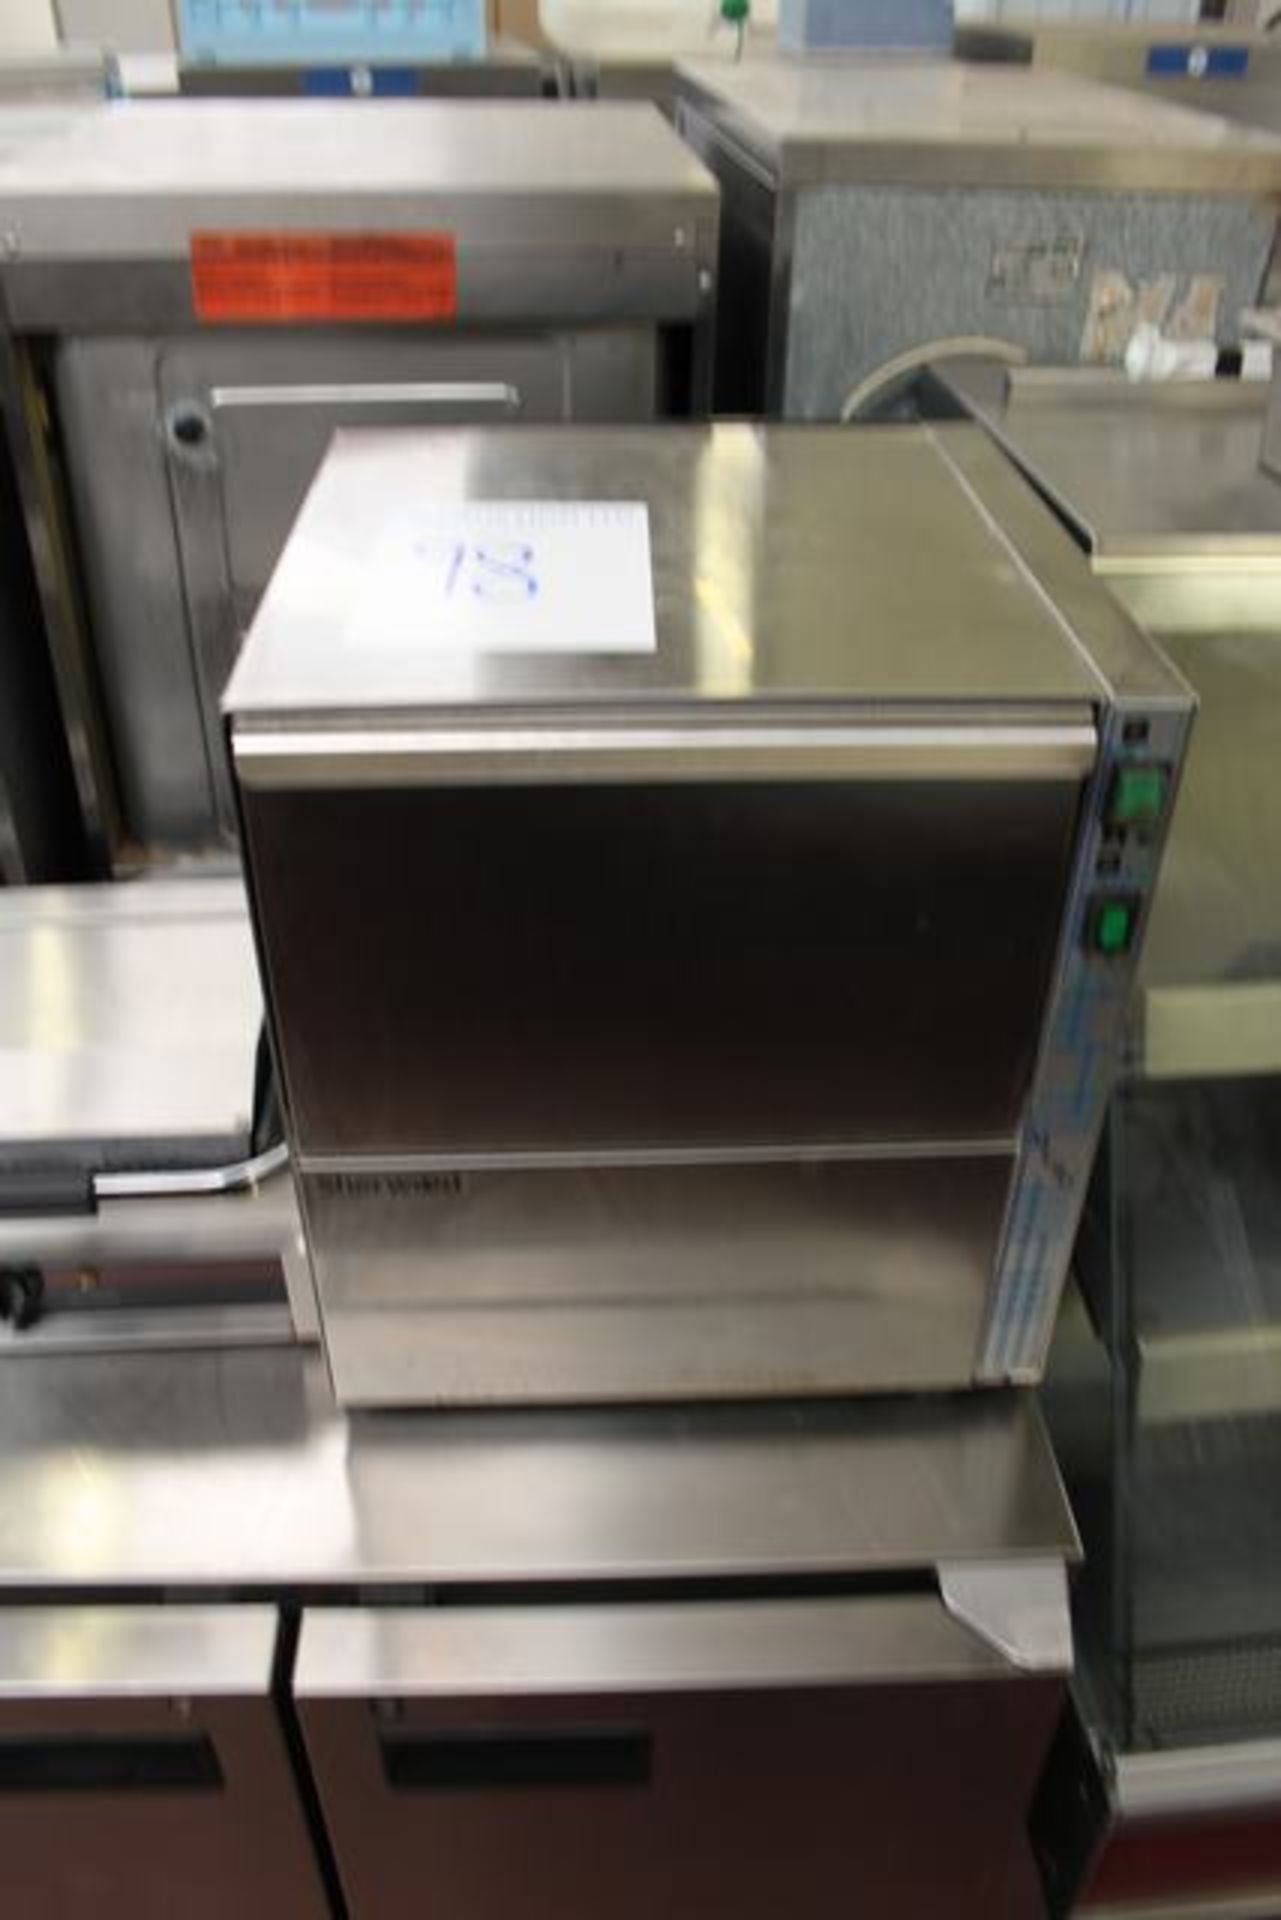 Sherwood Univerbar under counter glass washer glasswasher with stationary basket:  450x450mm  usable